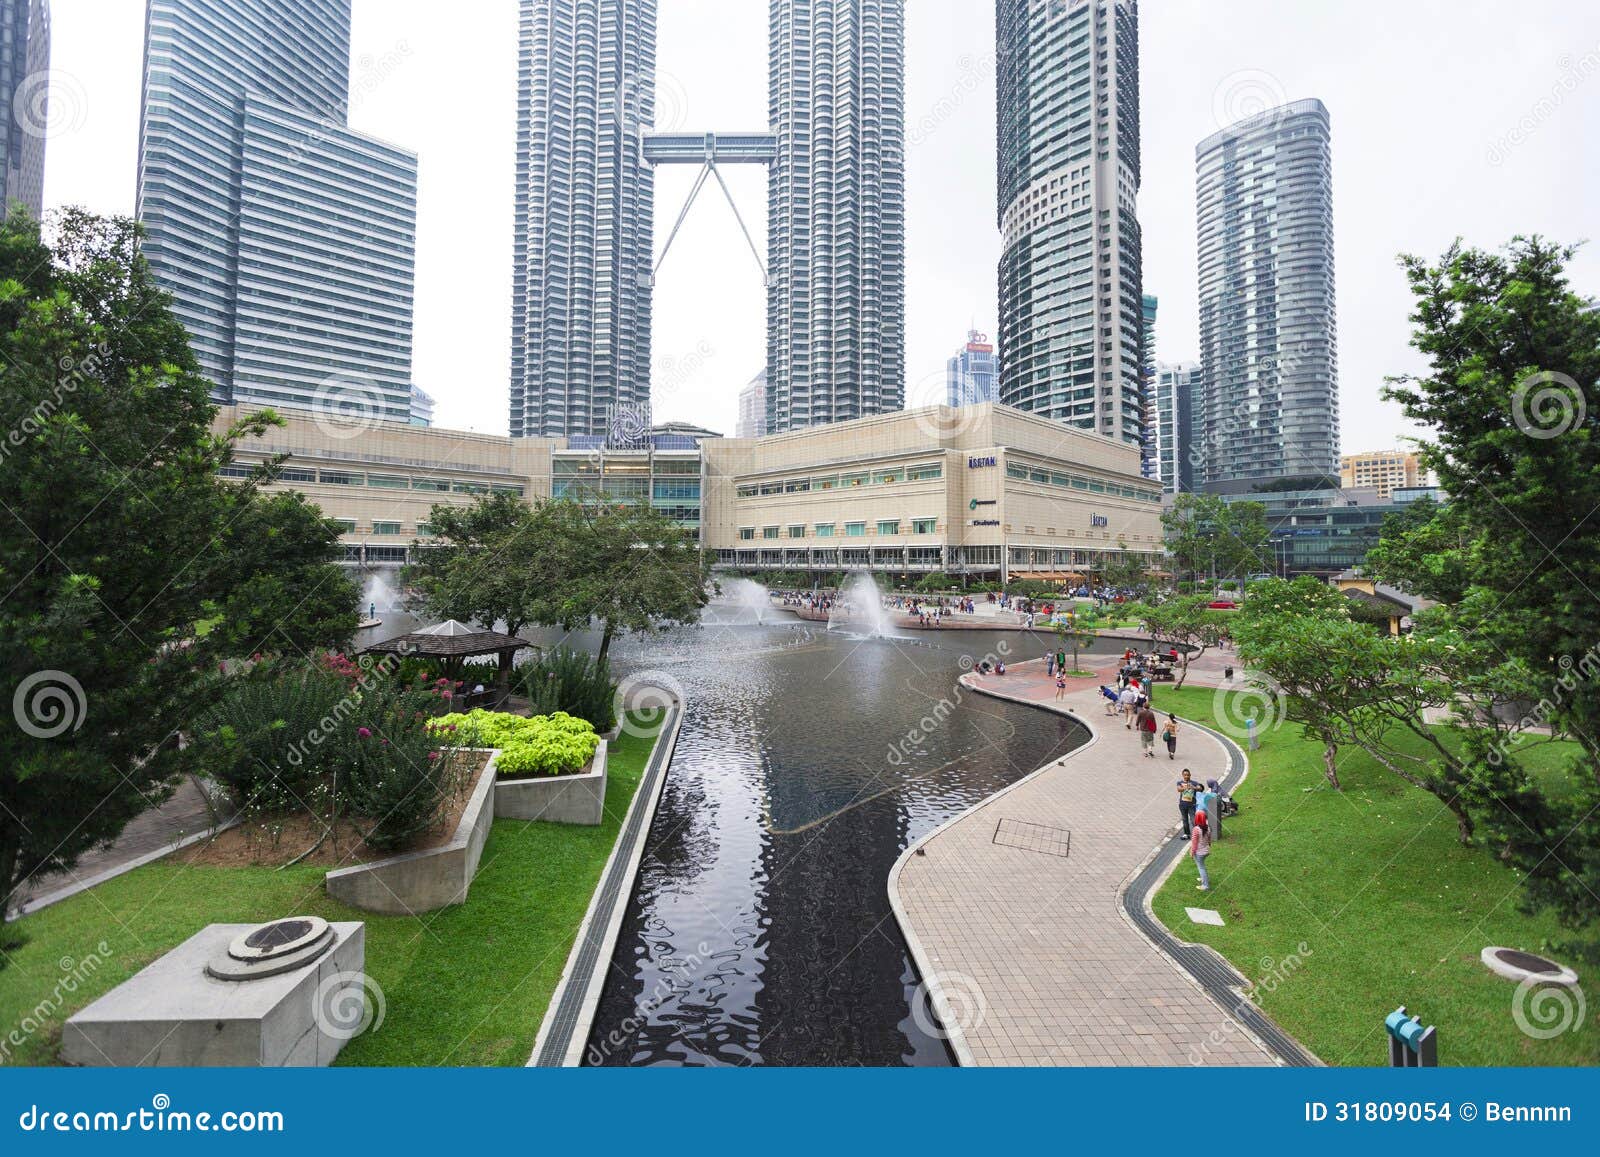 View Of The KLCC Park In Kuala Lumpur, Malaysia. Editorial ...